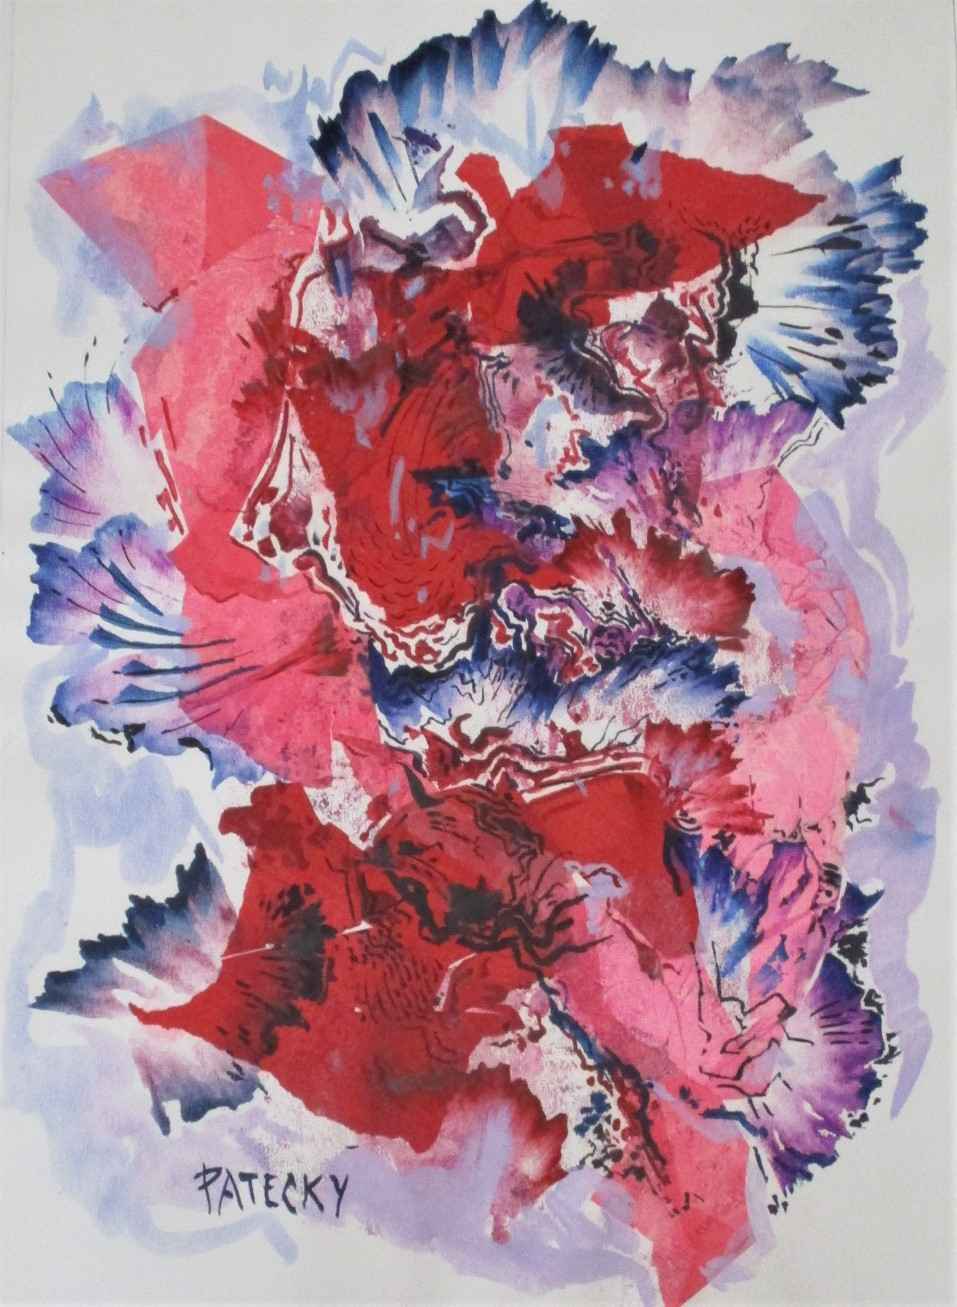 Red & Blue Collage by  Albert Patecky - Masterpiece Online